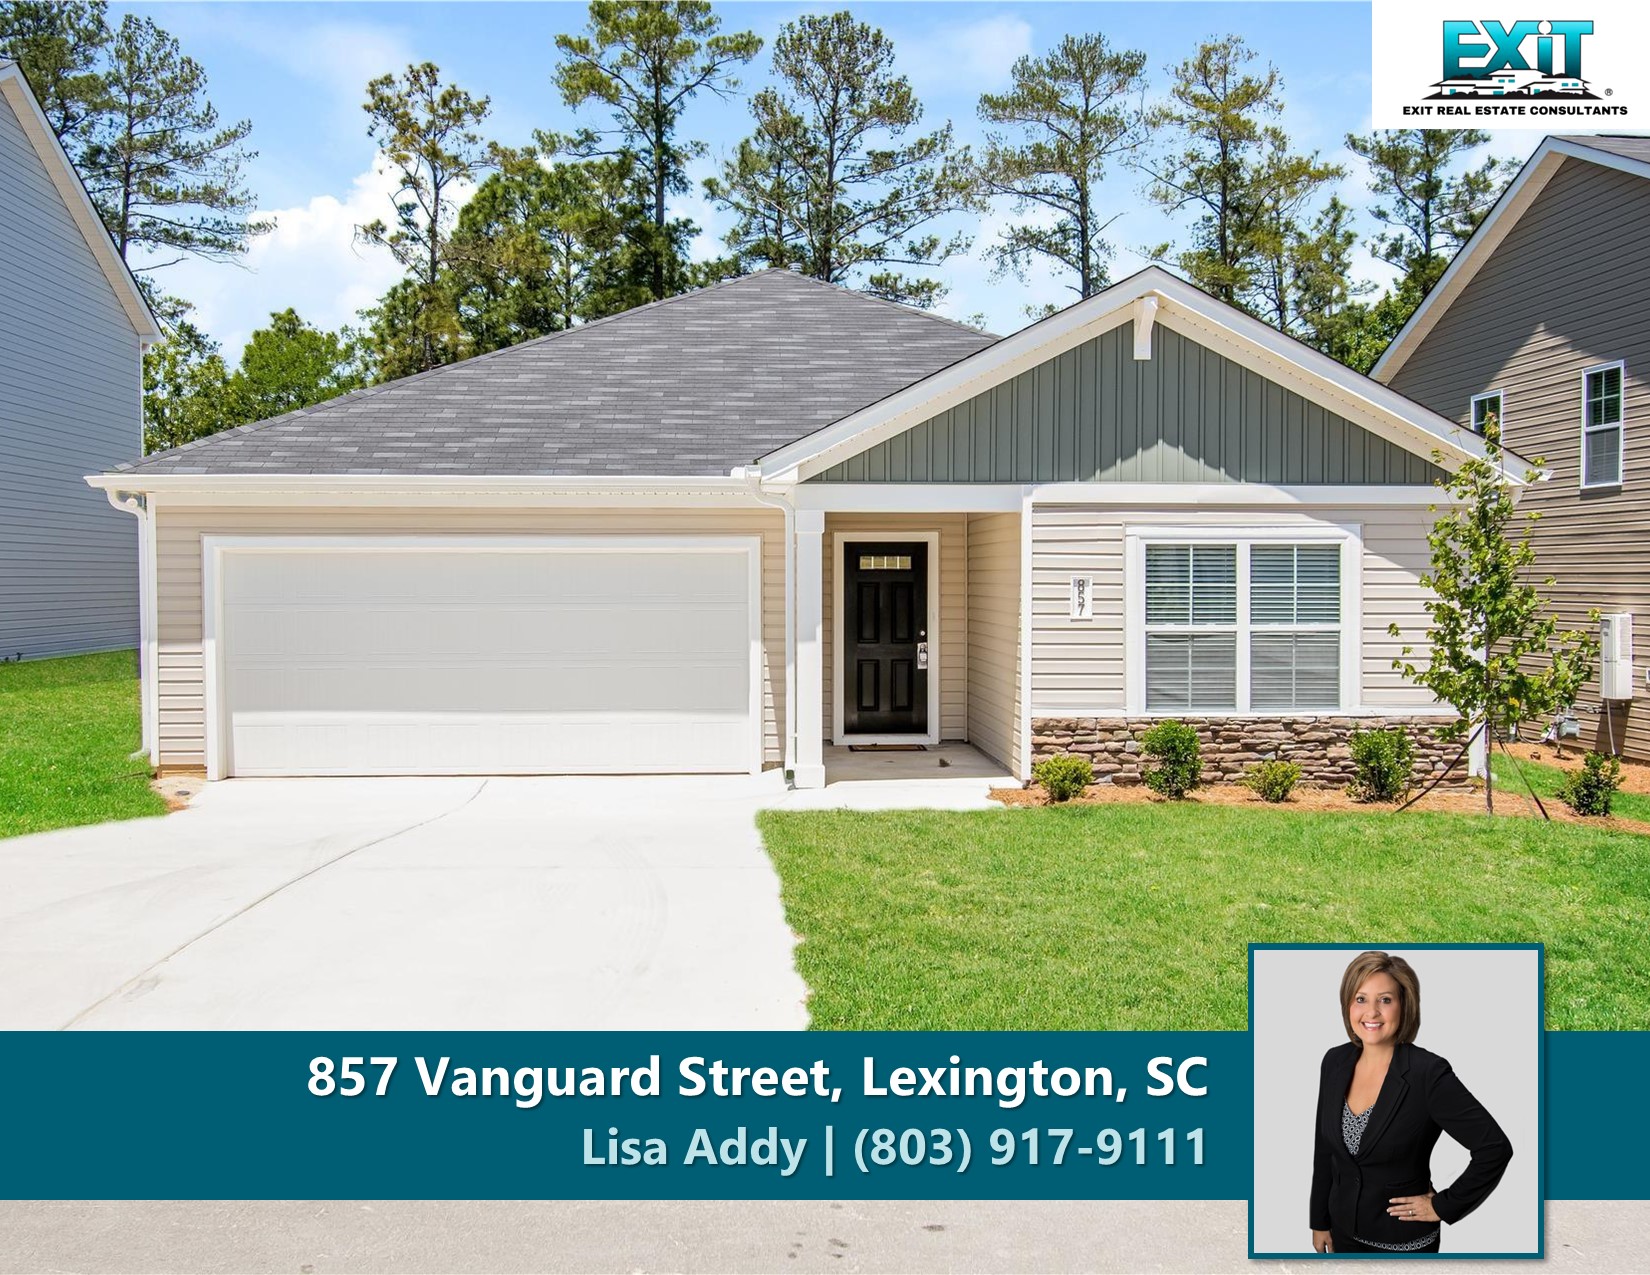 Just listed in Cannon Springs